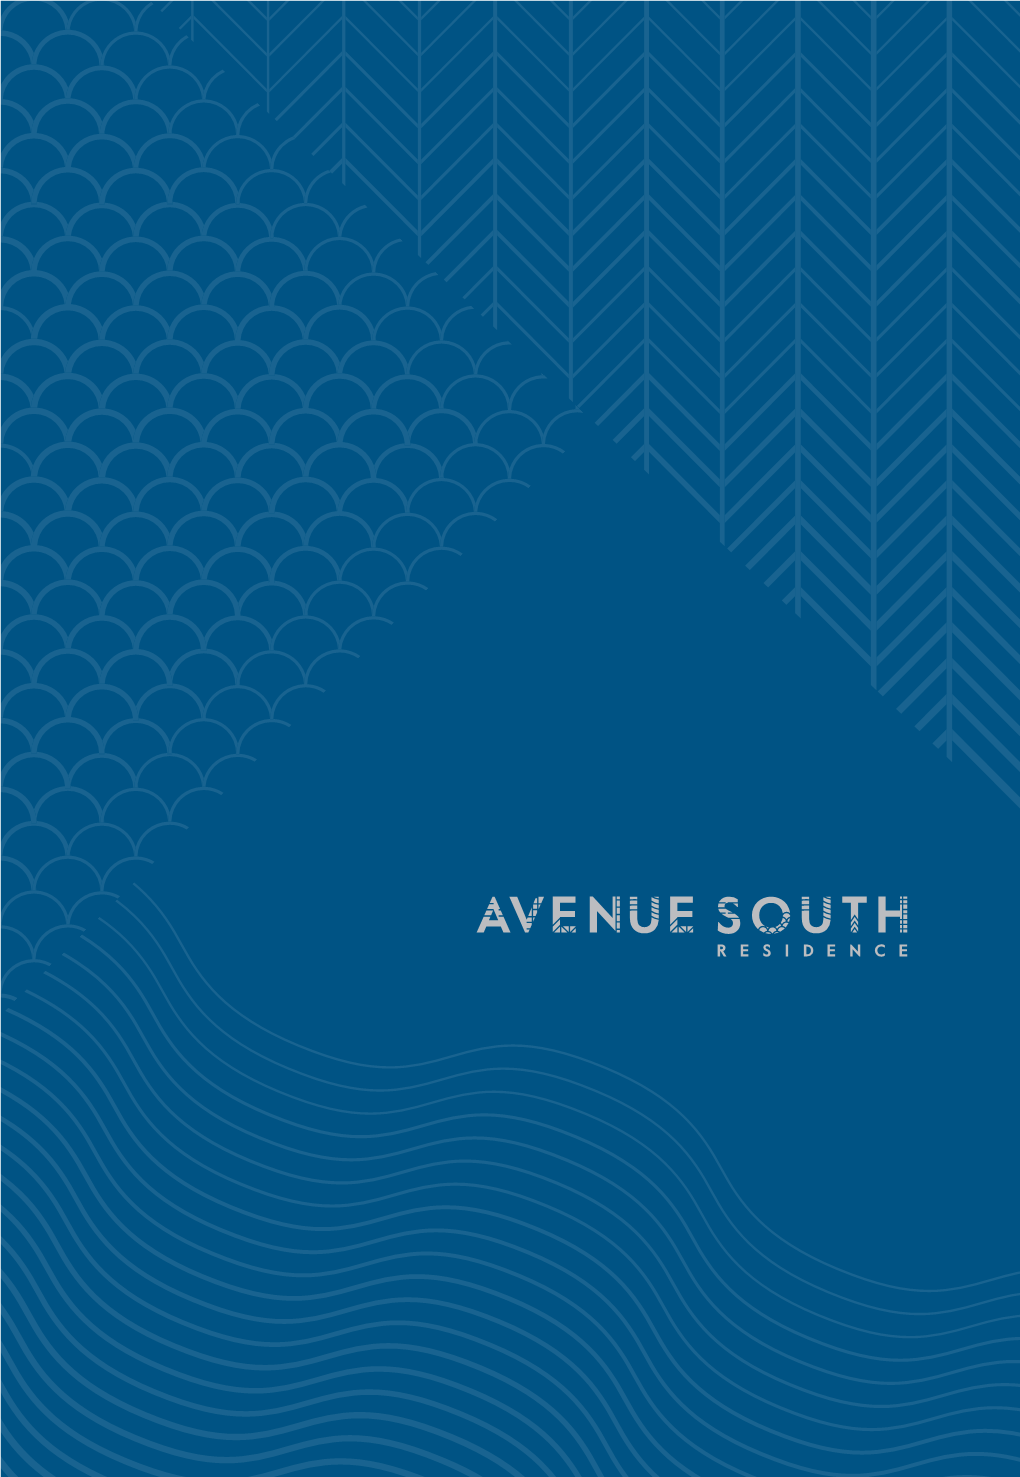 Avenue-South-Residence-Condo-New-Launch-Greater-Southern-Waterfront-1-Main-E-Brocher